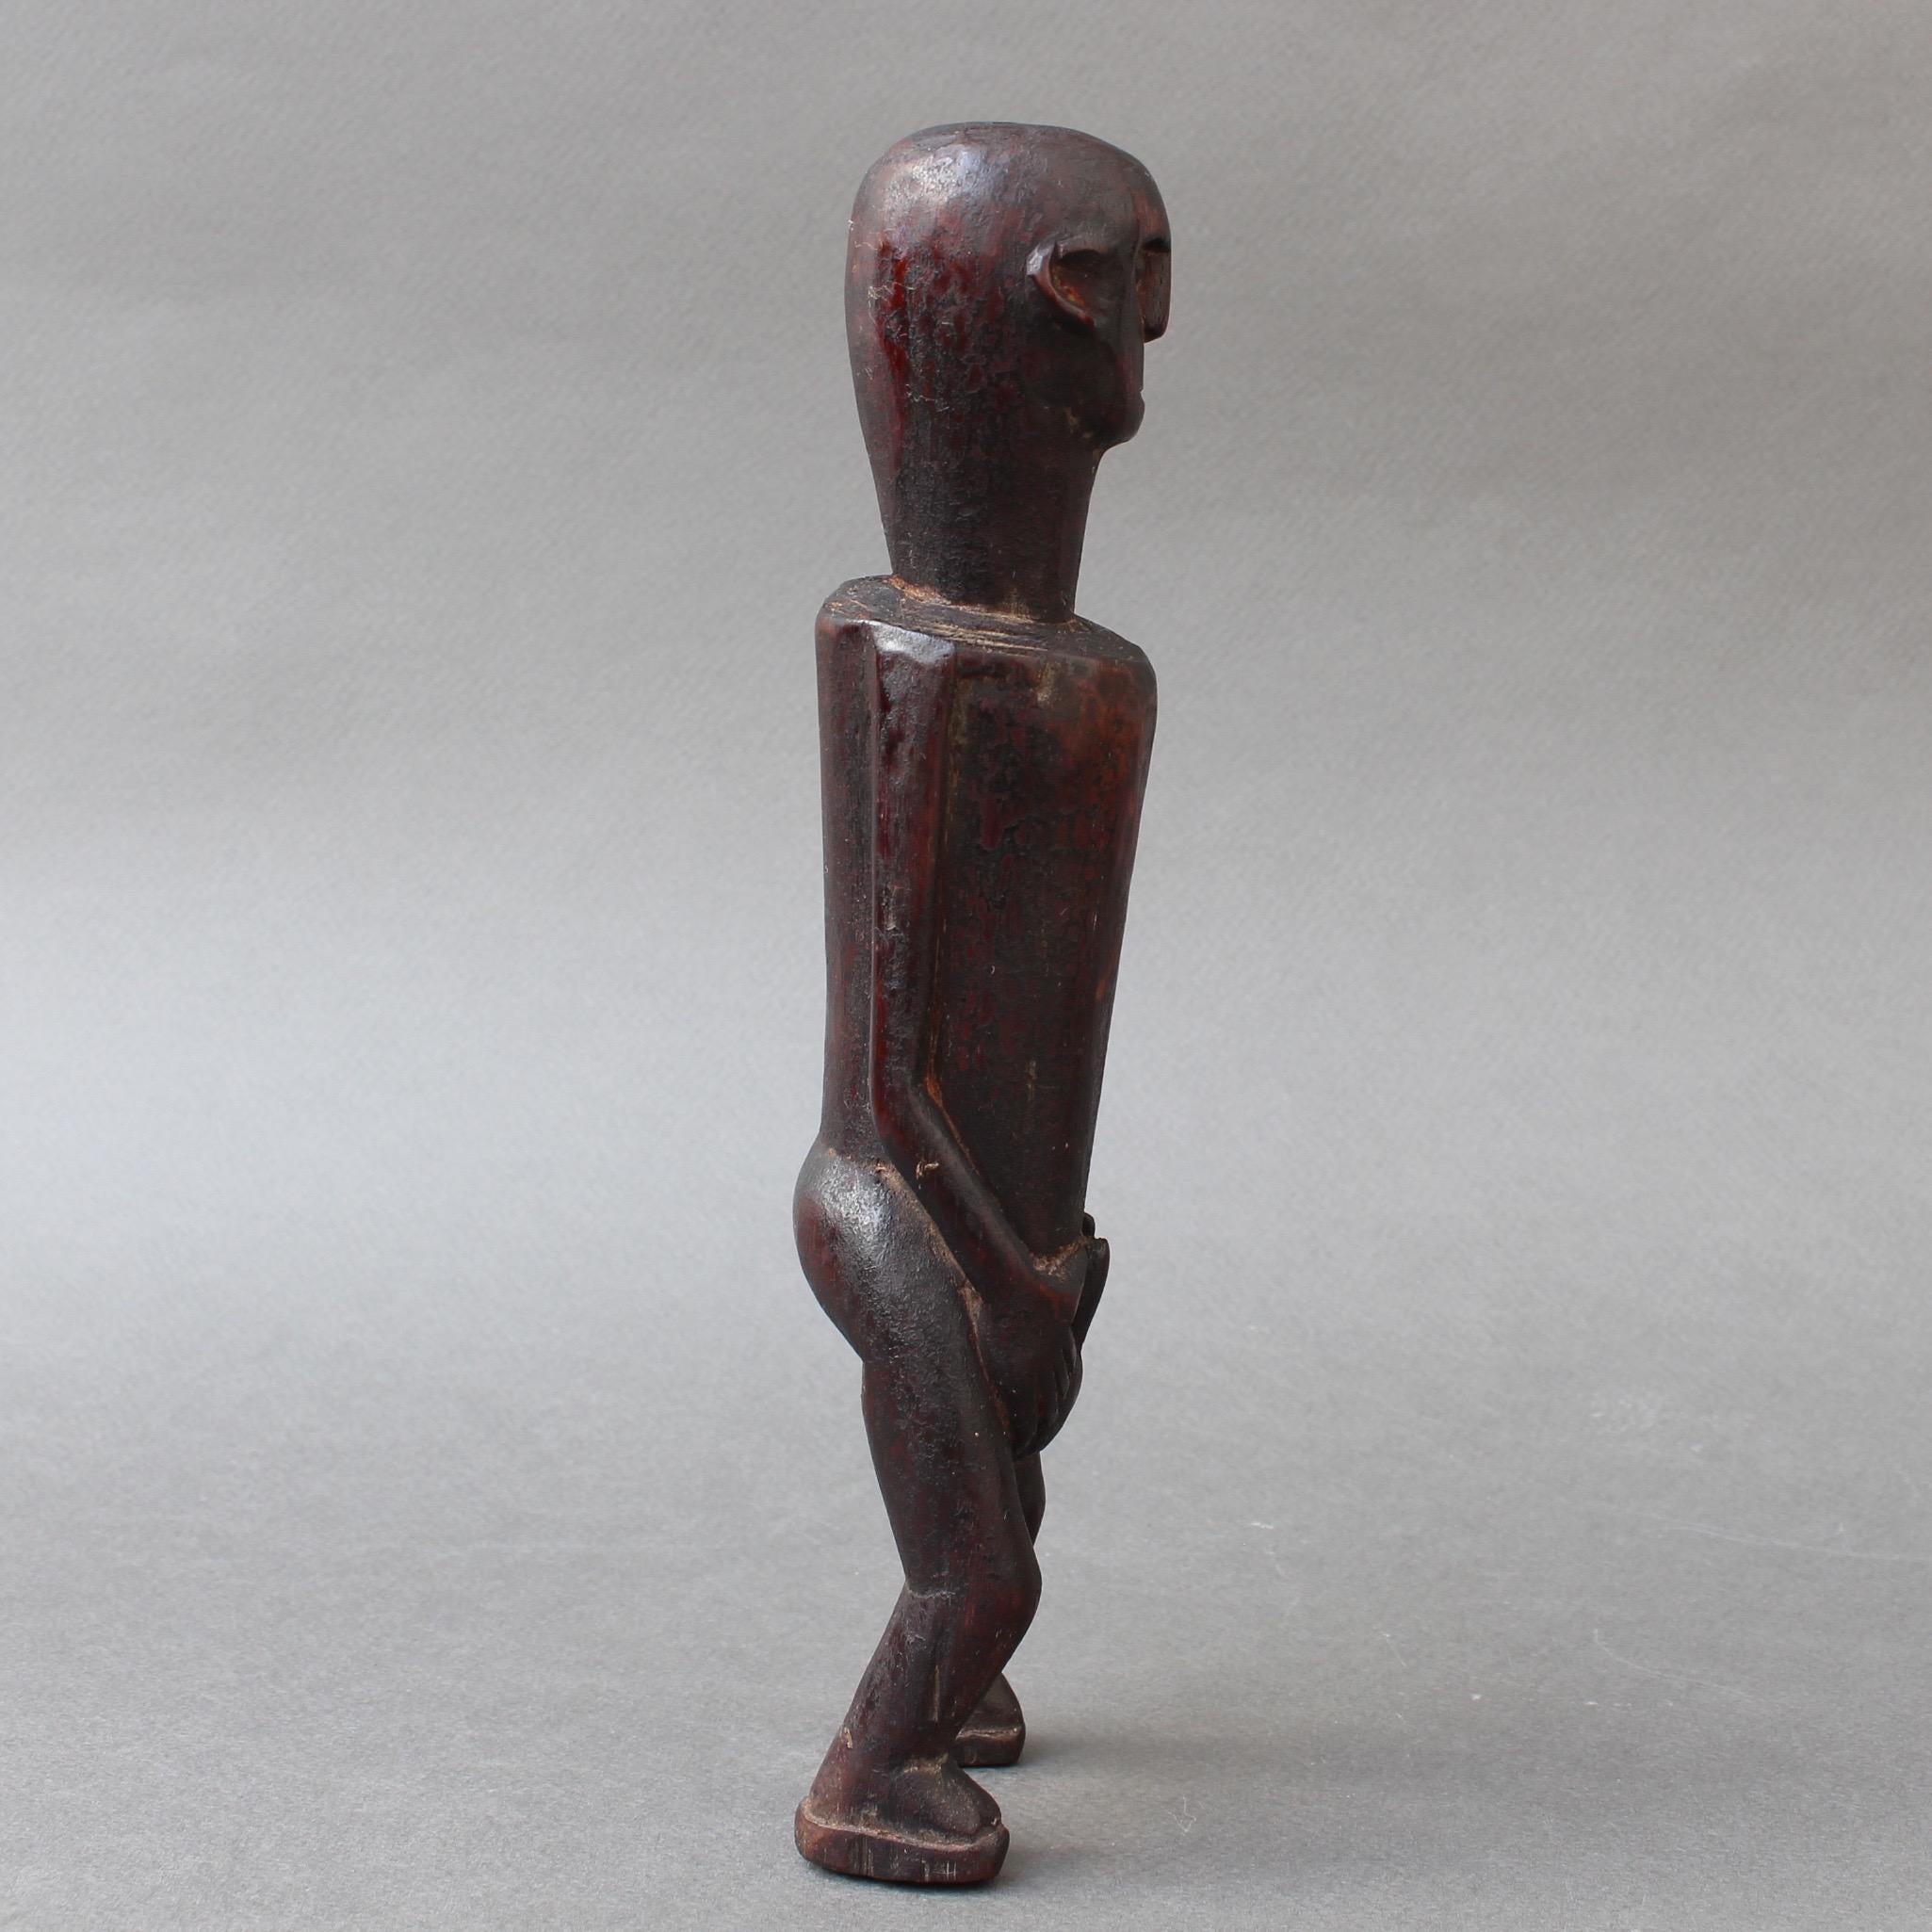 Tribal Wooden Sculpture or Carving of Fertility Figure from Sumba Island, Indonesia